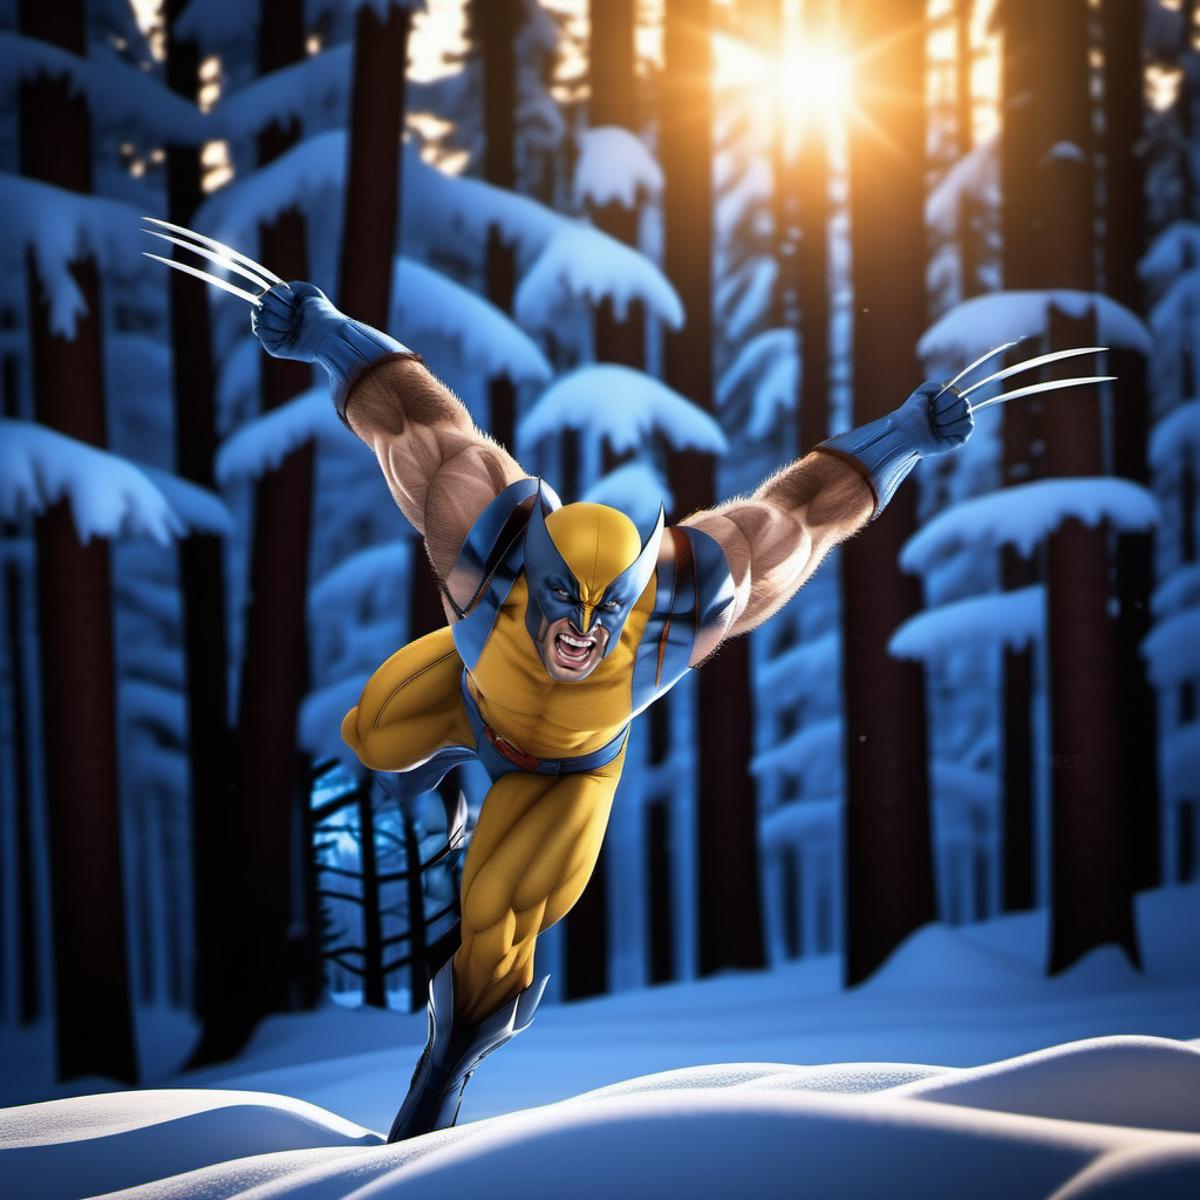 Wolverine with suit - SDXL image by PhotobAIt